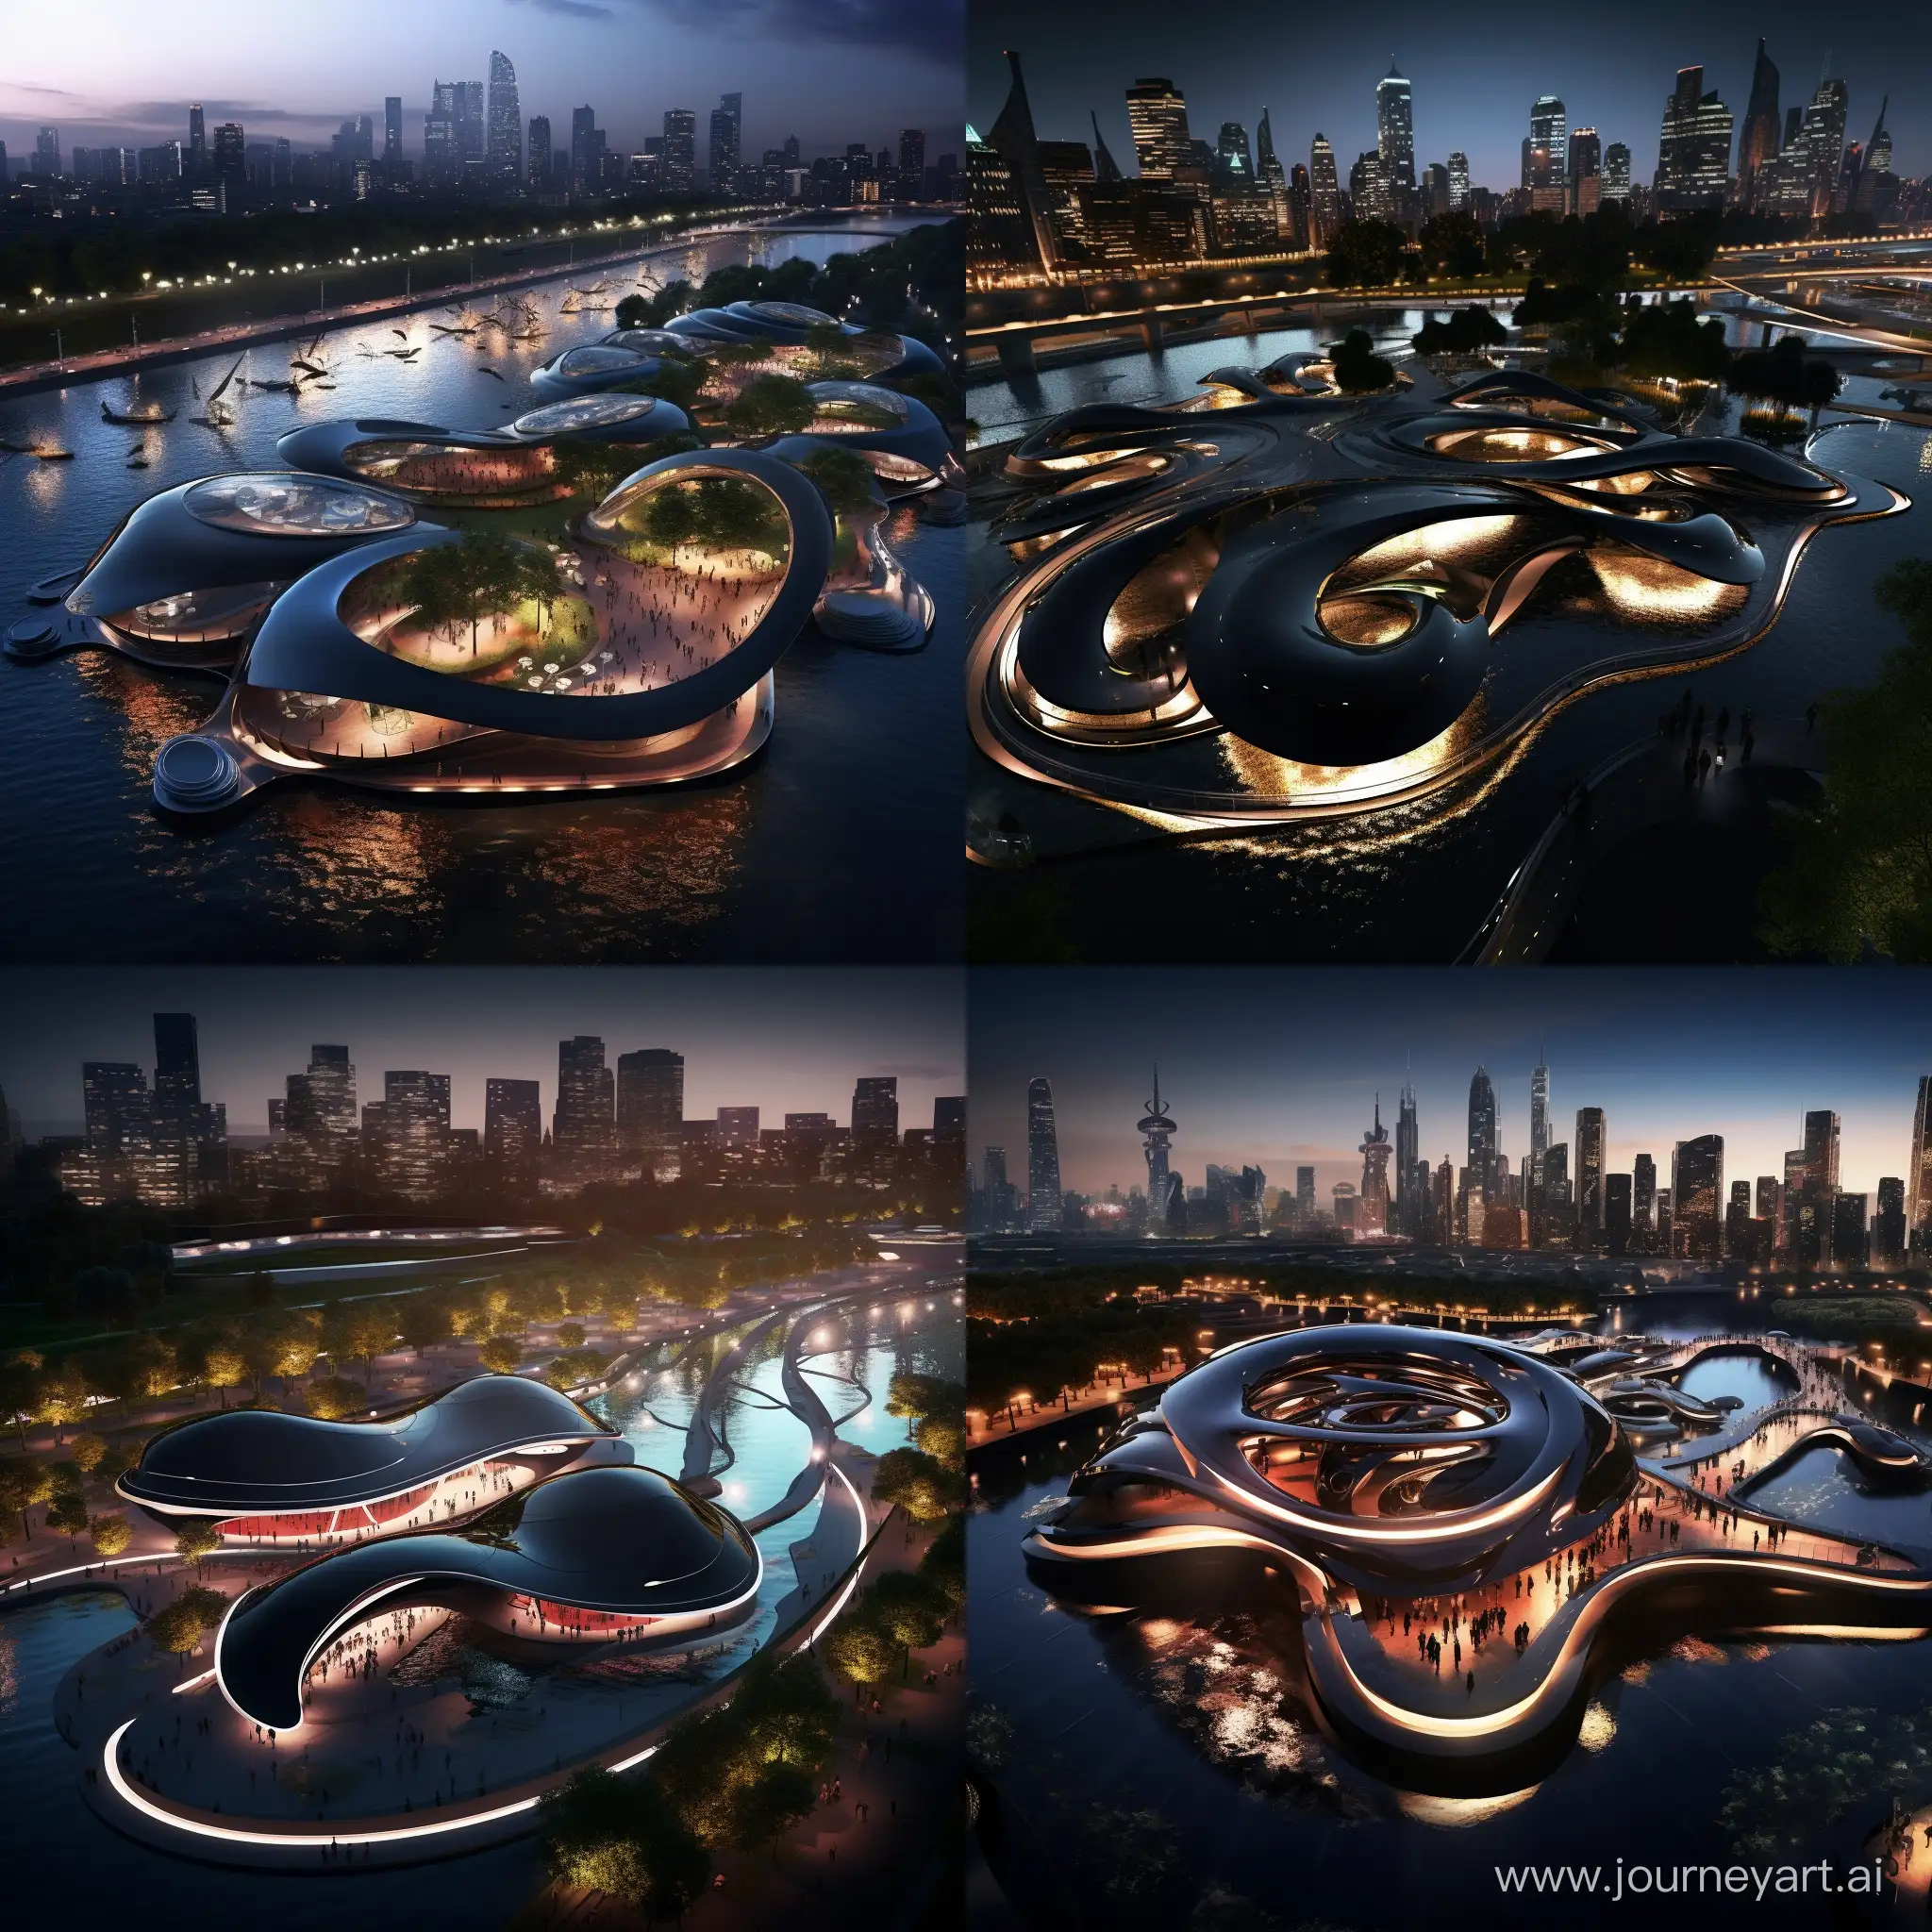 /imagine prompt: https://s.mj.run/dVakdShNkPY urban park on the water,aerial view, fluid and curved forms, black and metallic leather, sensation of movement, dynamism, carbon fiber, futuristic sensation,modern, integration of technology,modular design, set of LED lights, ergonomics, attractive, eye-Catching,abstract shapes,curved, sculptural, organic shapes in the style of the movie Blade Runner panorama 